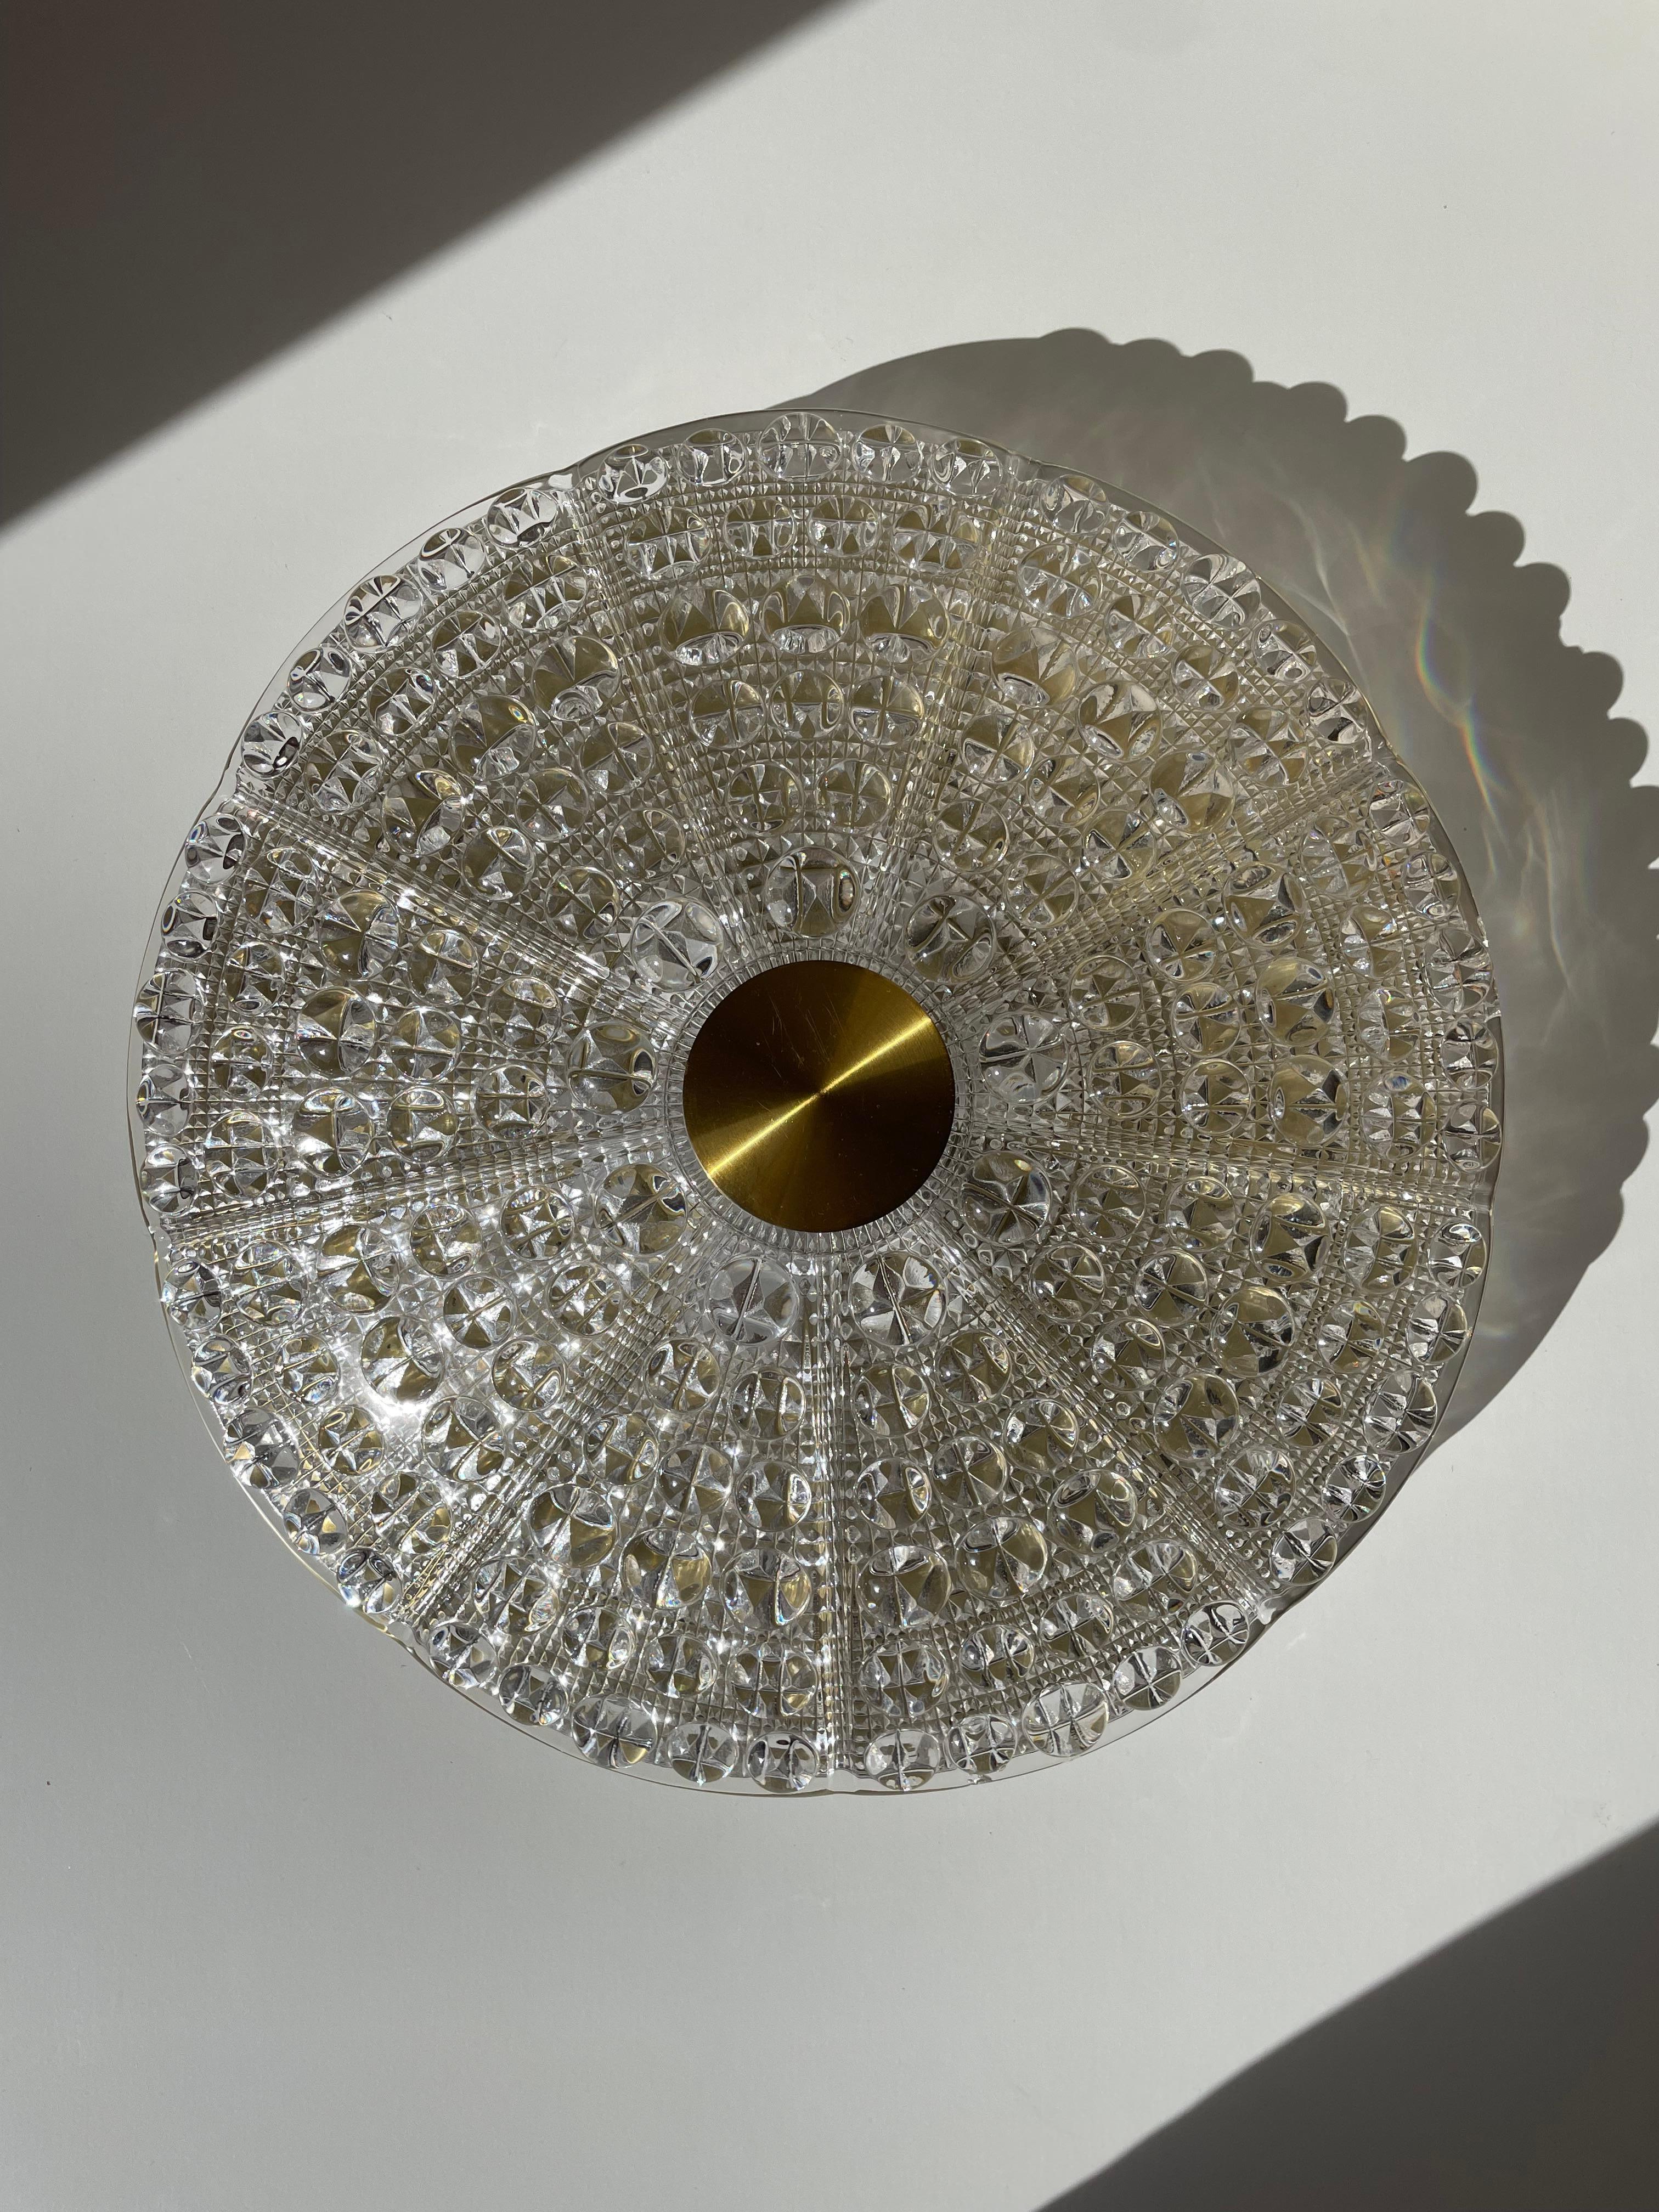 Solid crystal Swedish midcentury modern flush mount / wall sconce. Mounted on brass plate with brass details. Large and small round bubbles on the thick curved crystal dome with lined texture on the inside. Designed by Carl Fagerlund for Orrefors in